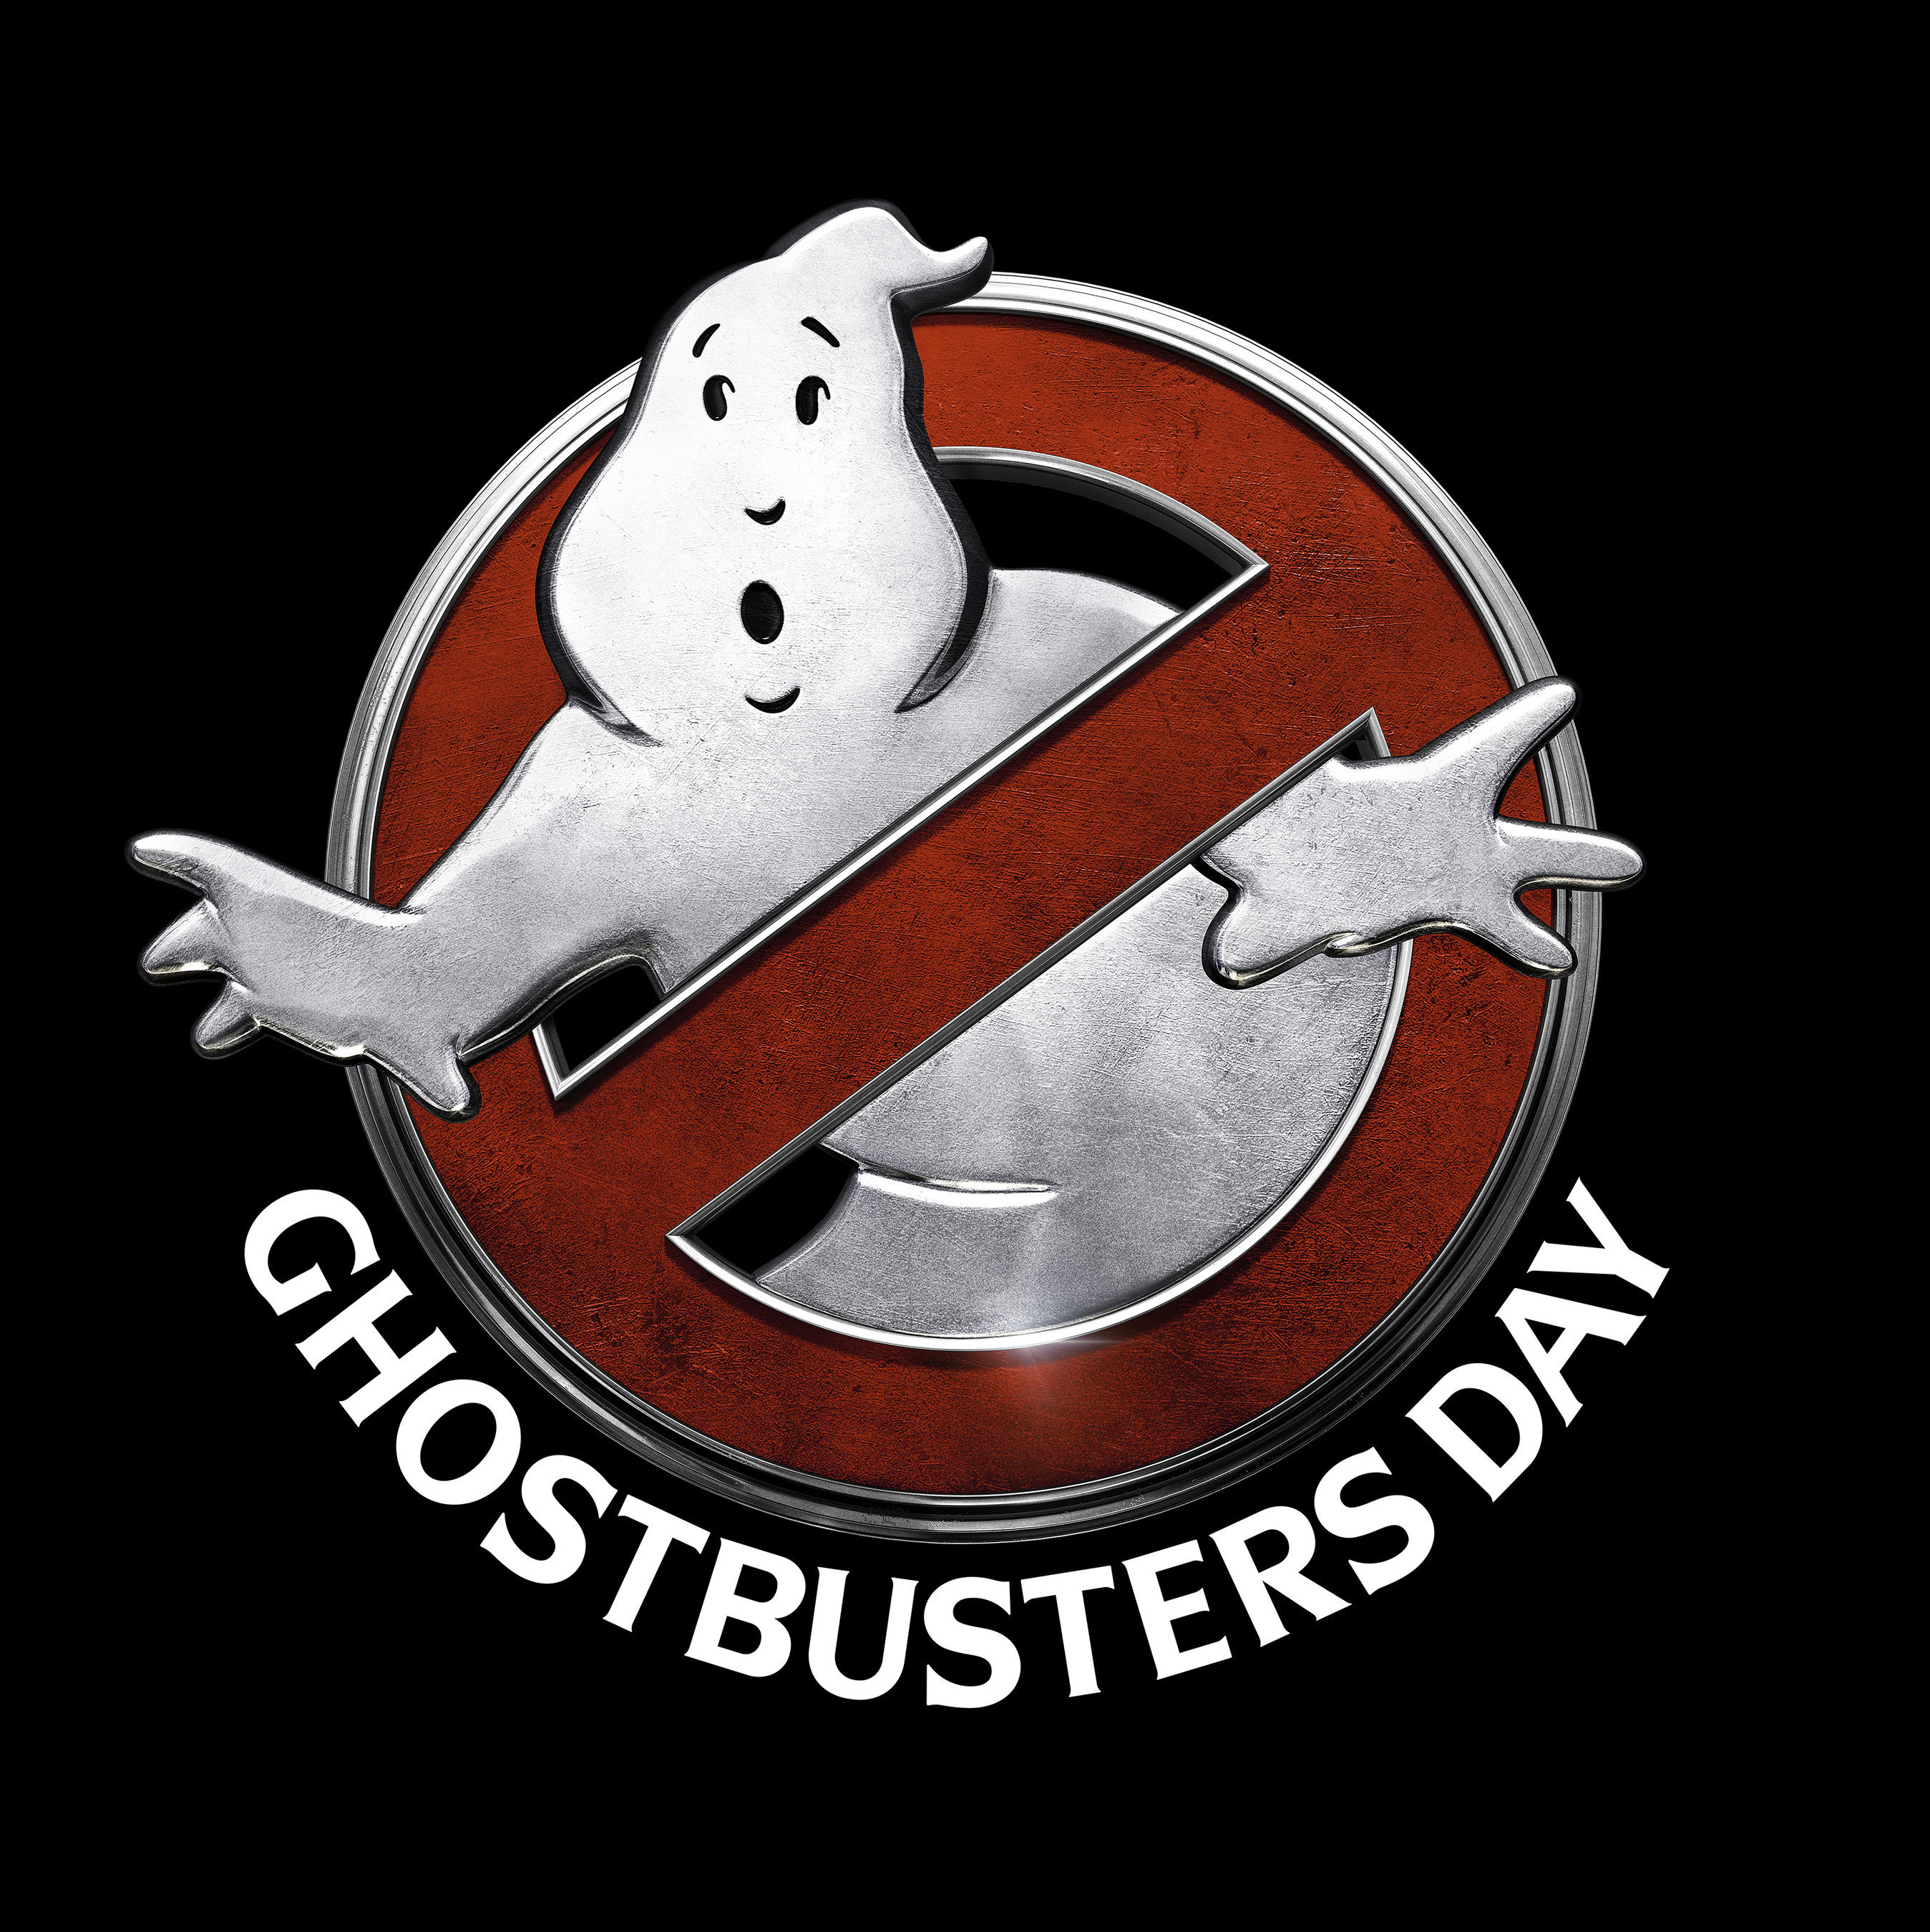 Ghostbusters Day